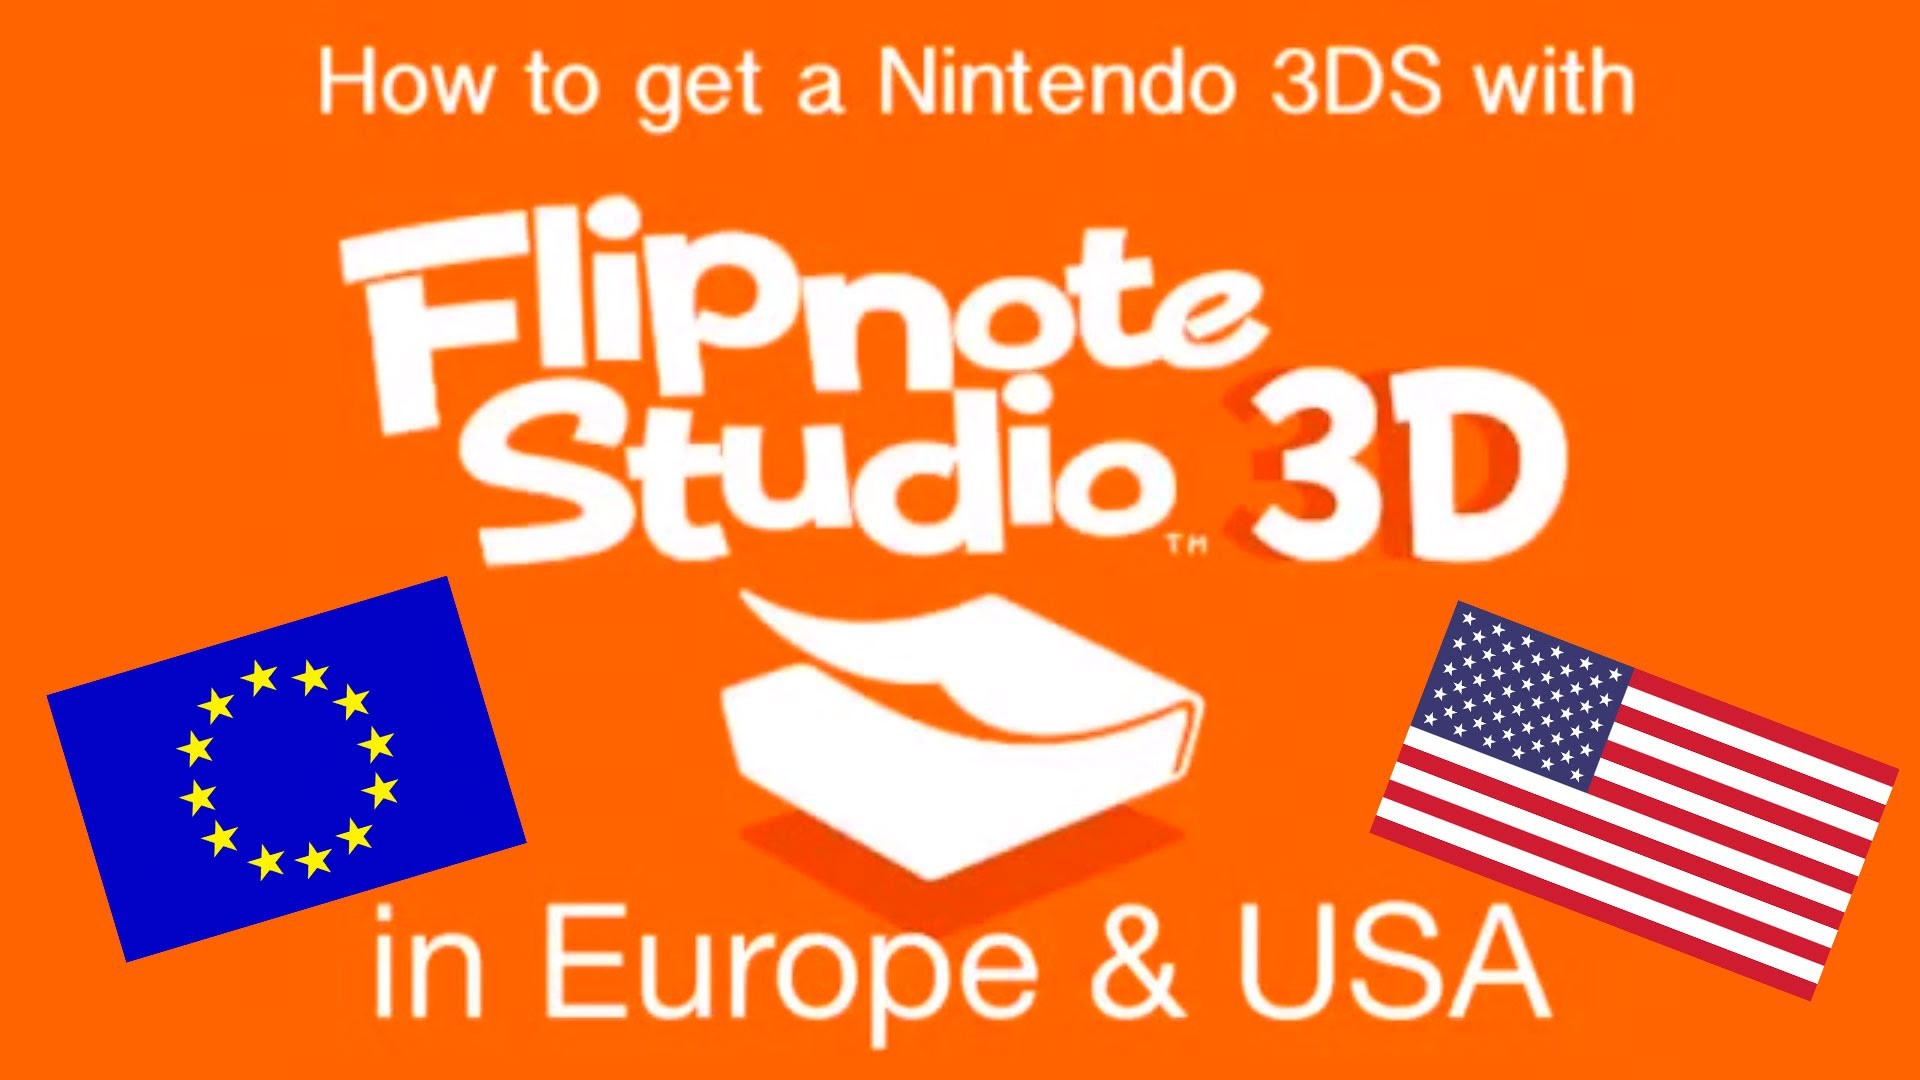 1920x1080 How to get a Nintendo 3DS with Flipnote Studio 3DS in Europe and USA,  geezerdk